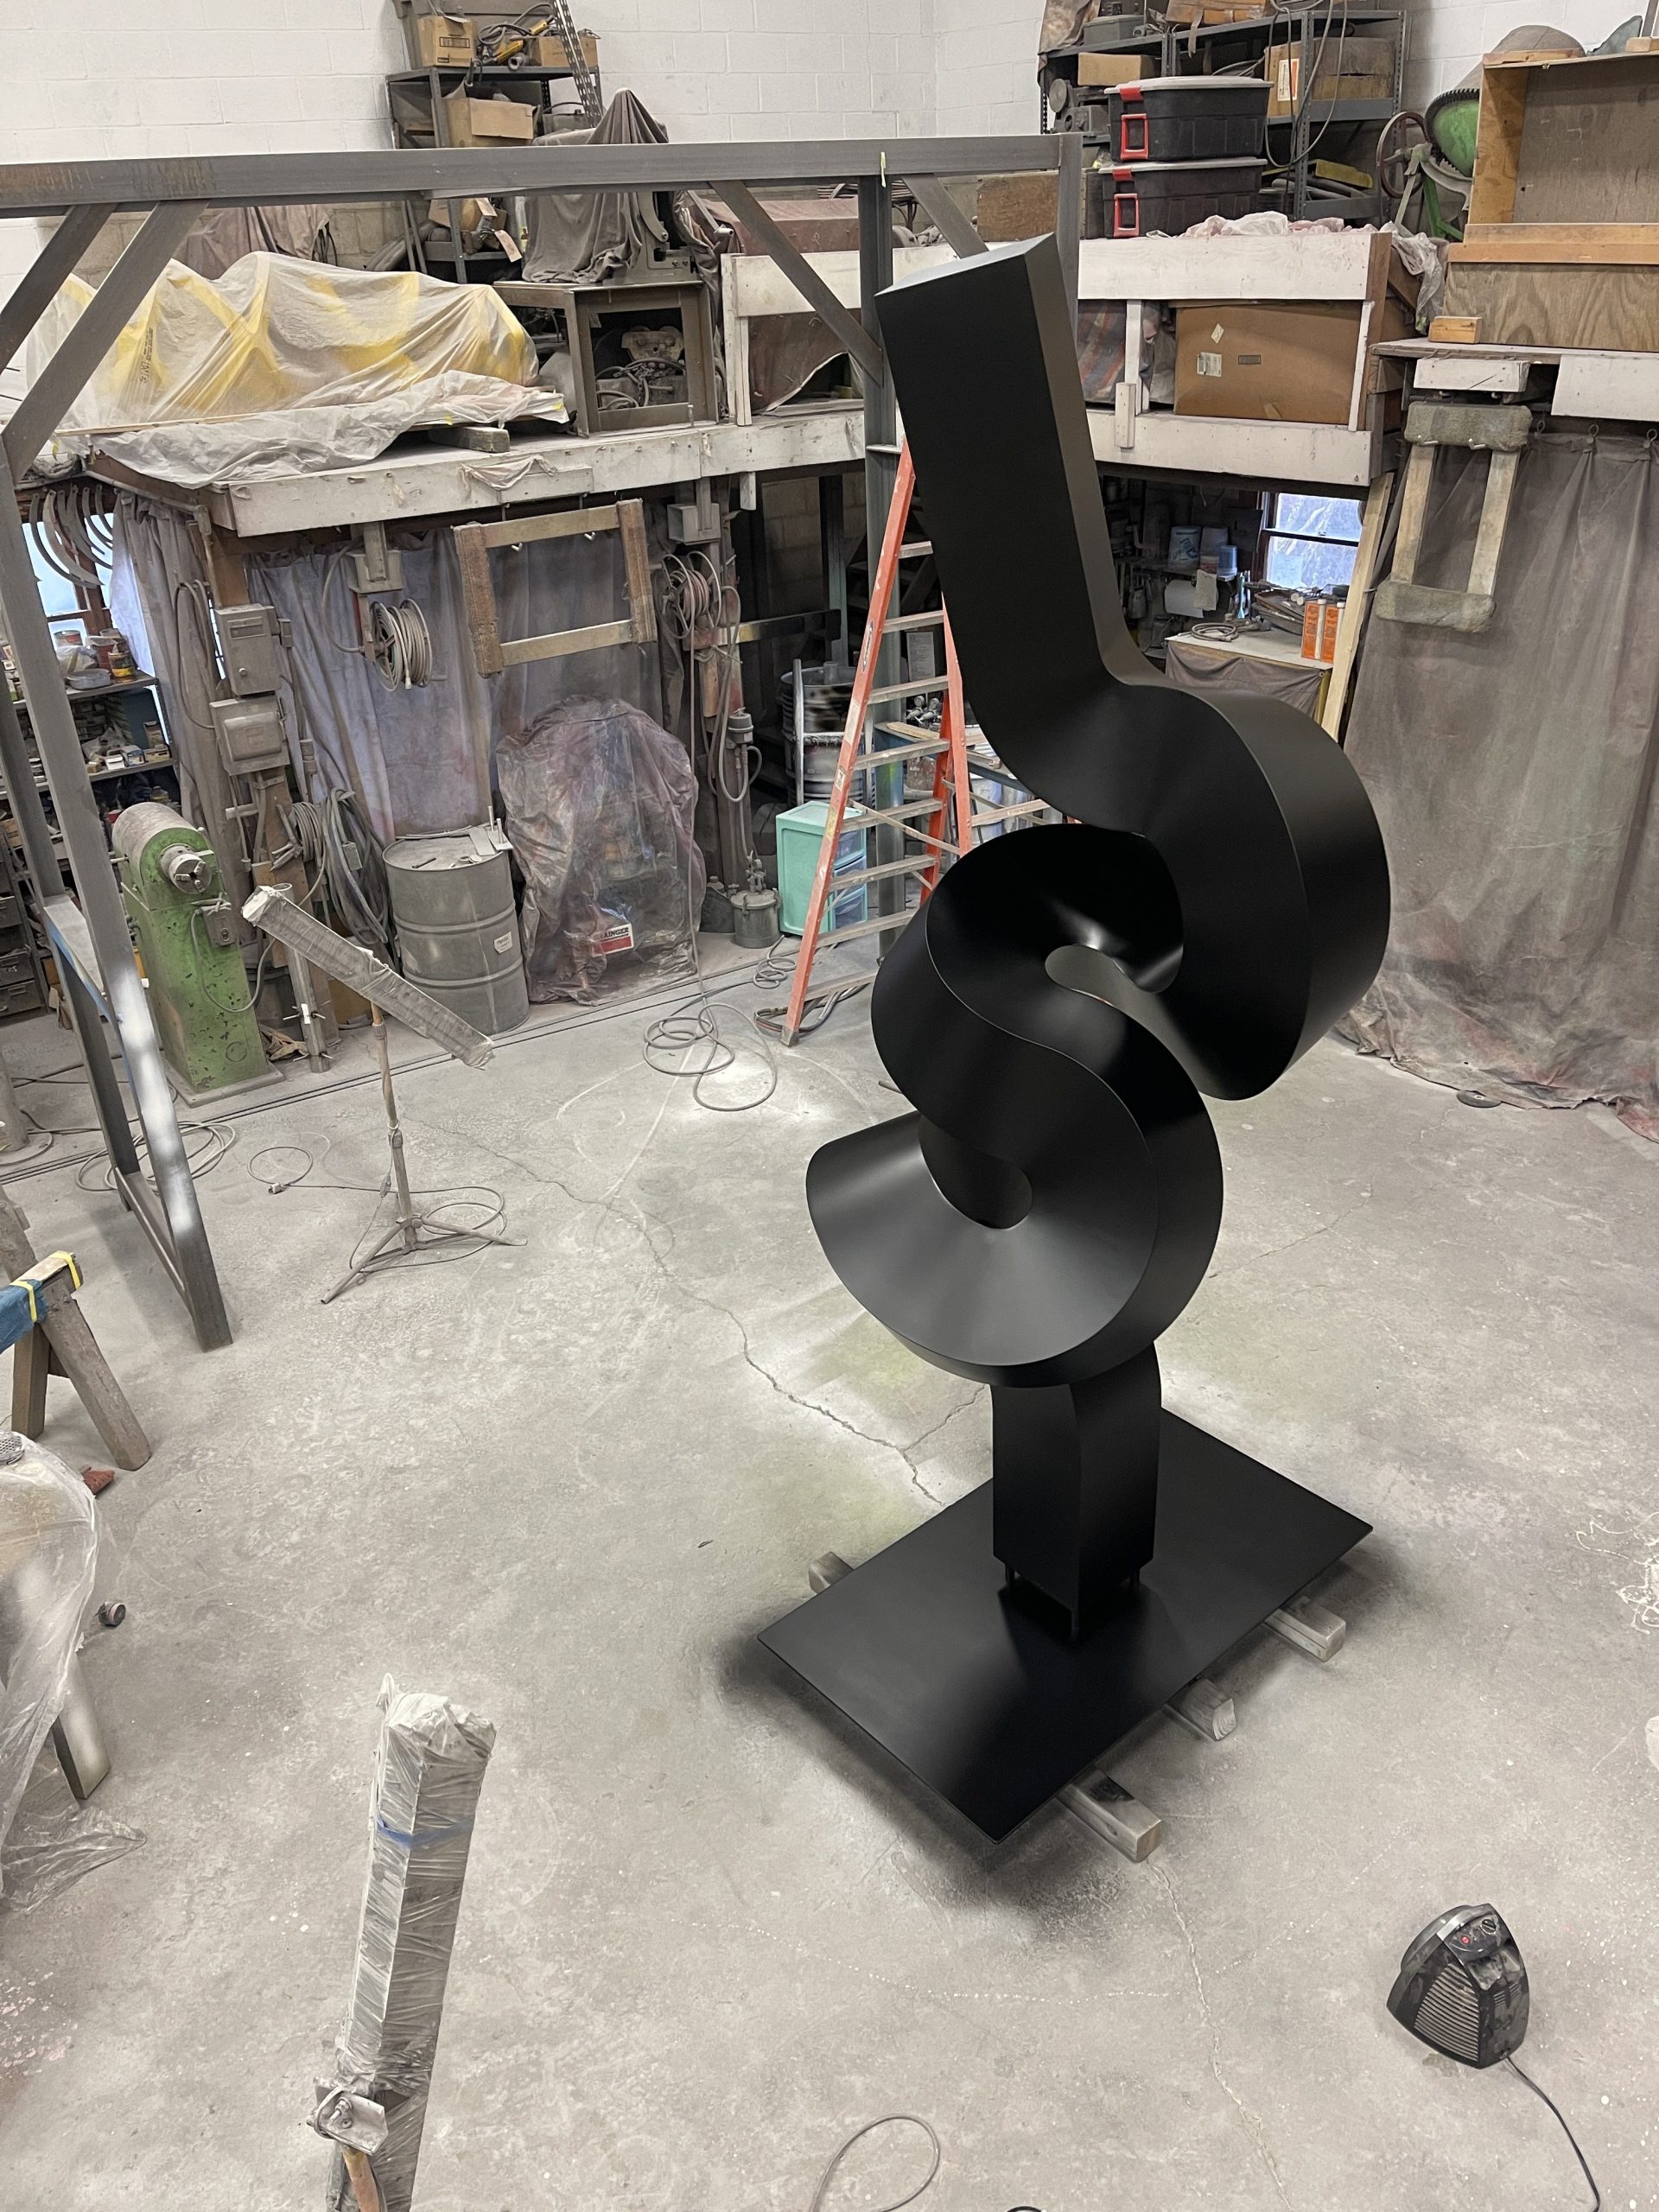 Clement Meadmore, “Uprising” (1995) 1/4 fabricated in 2023